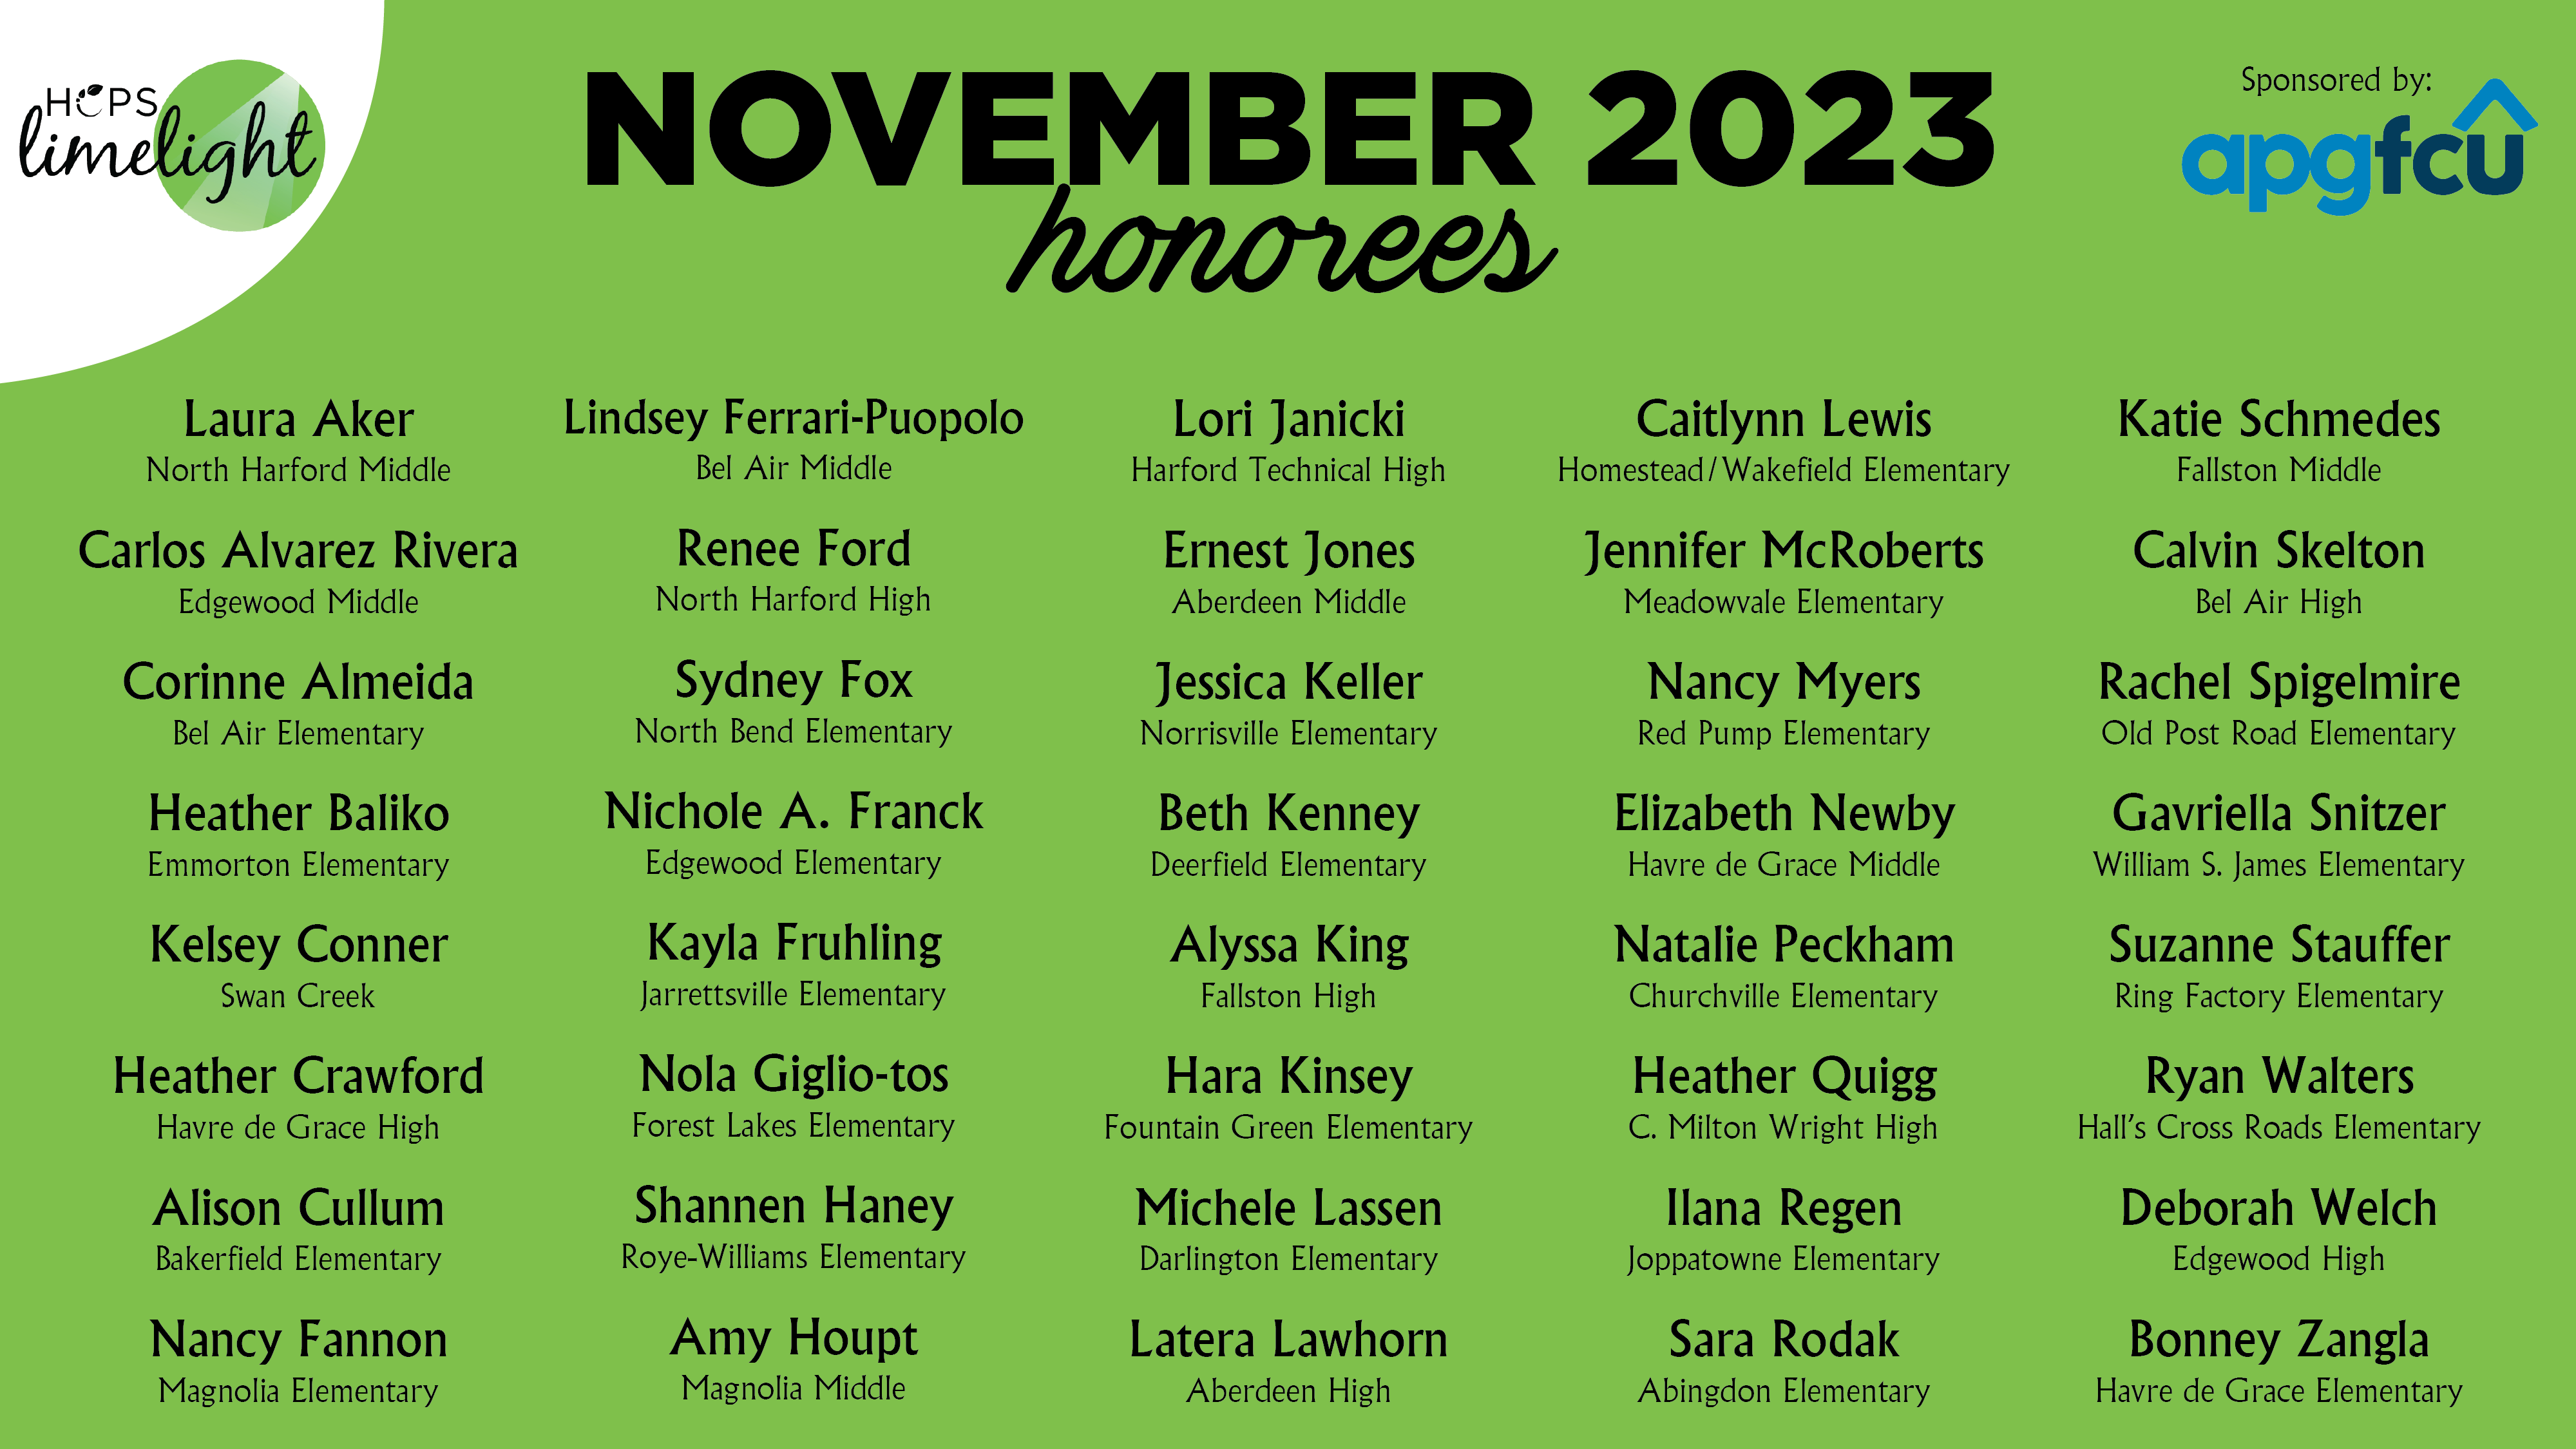 HCPS Limelight Honorees - October 2023